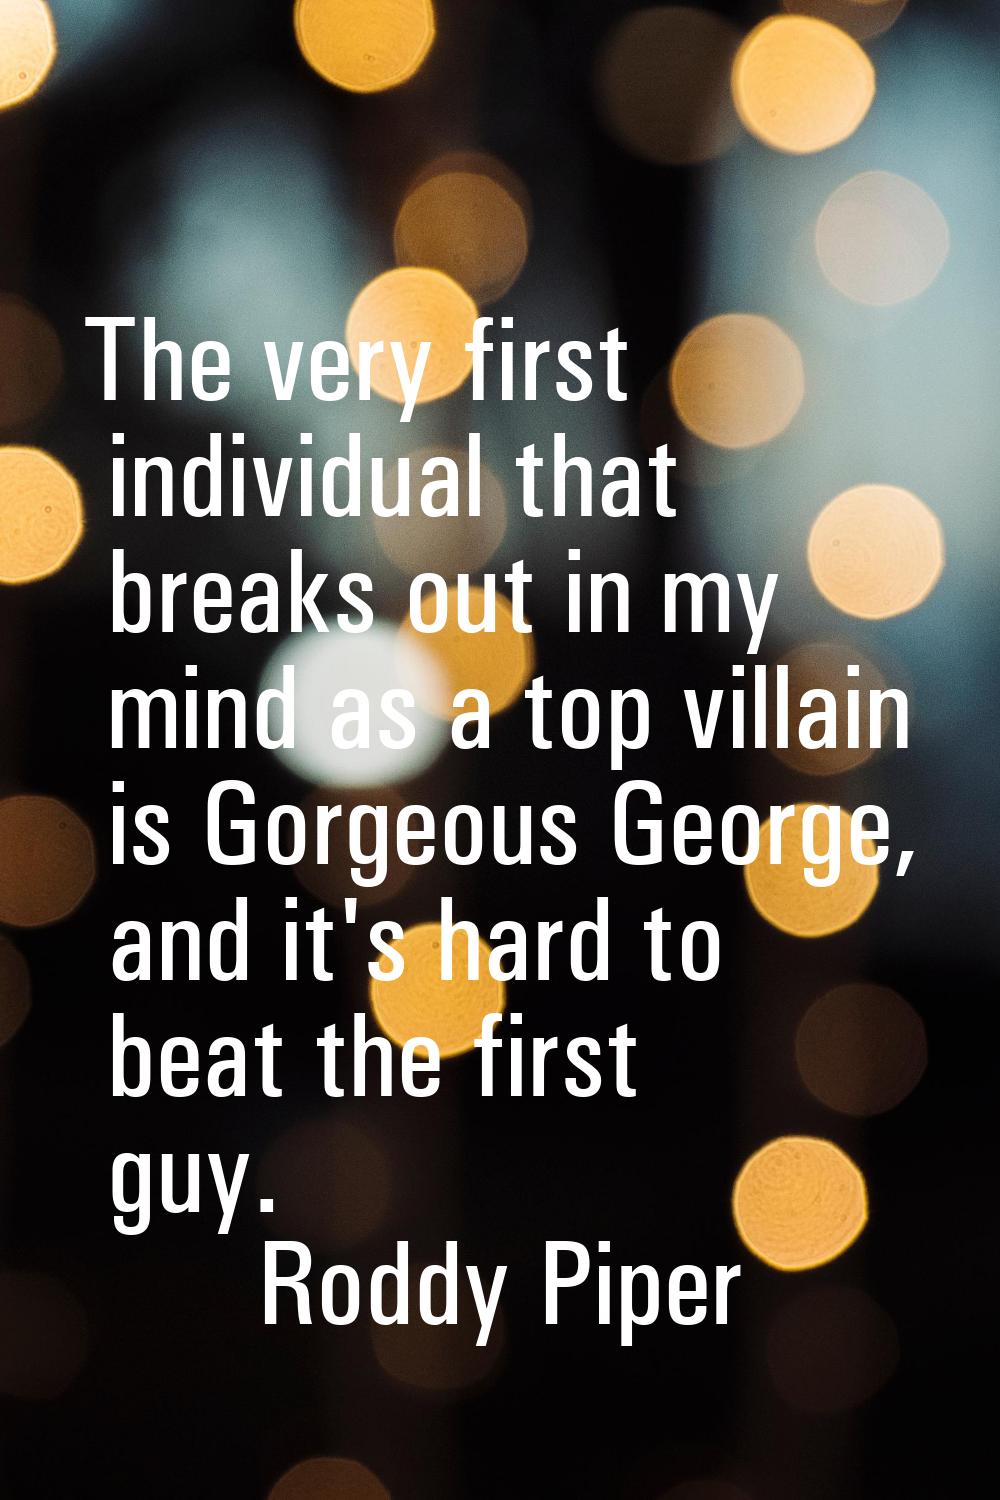 The very first individual that breaks out in my mind as a top villain is Gorgeous George, and it's 